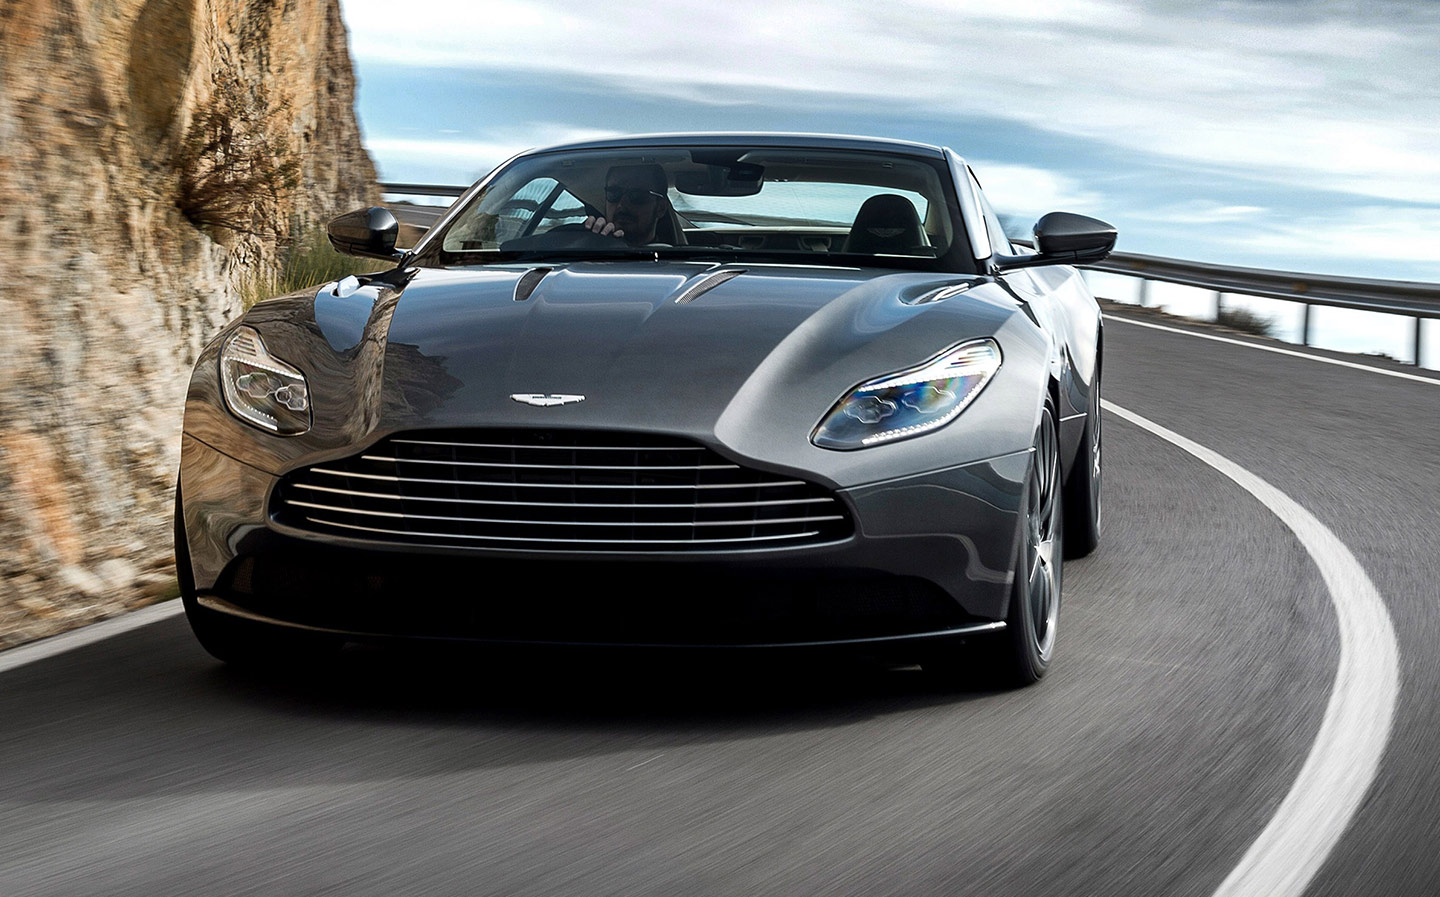 Reader Letters: Aston corrections, speed limiters, Citroën brake wear and motorcycle filtering